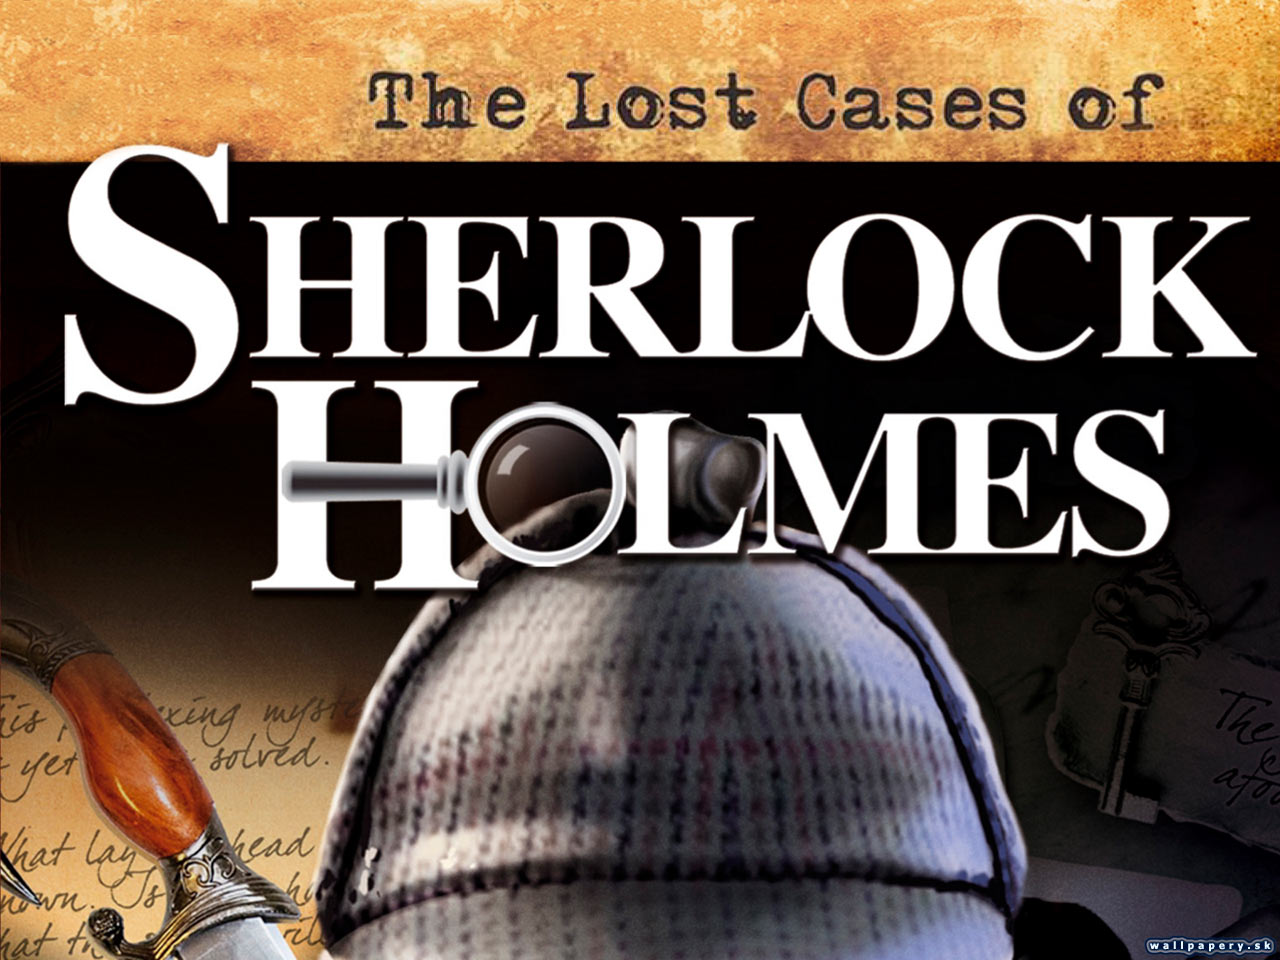 The Lost Cases of Sherlock Holmes - wallpaper 2